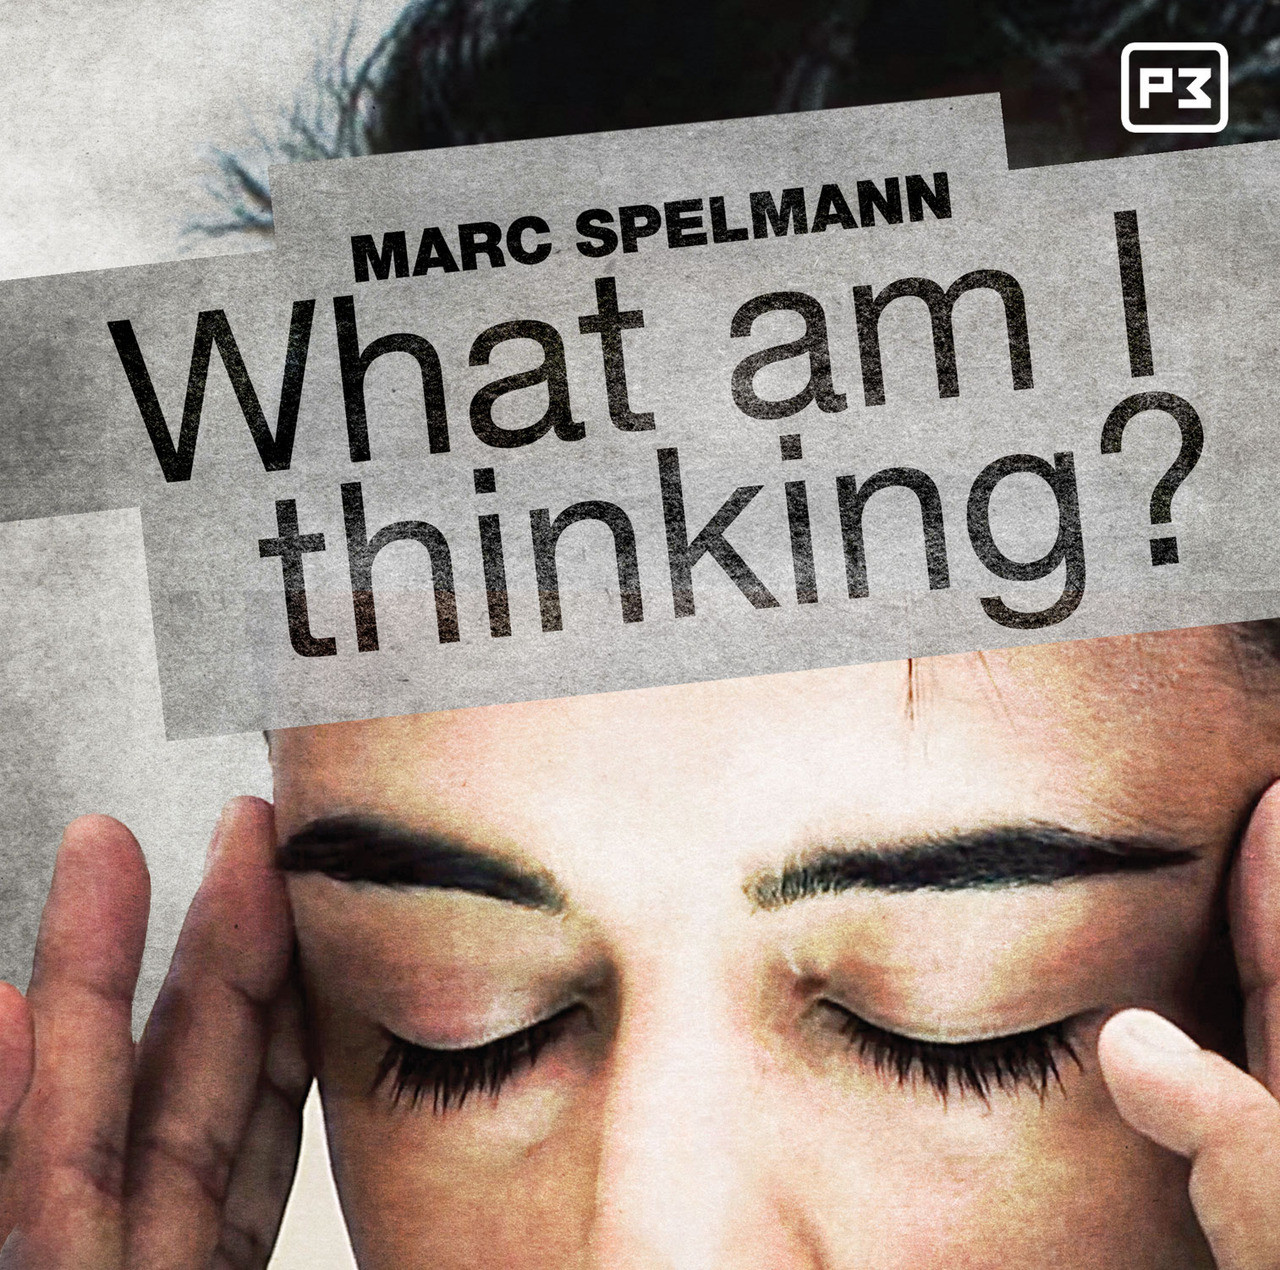 What am I thinking? by Marc Spelmann (DVD)